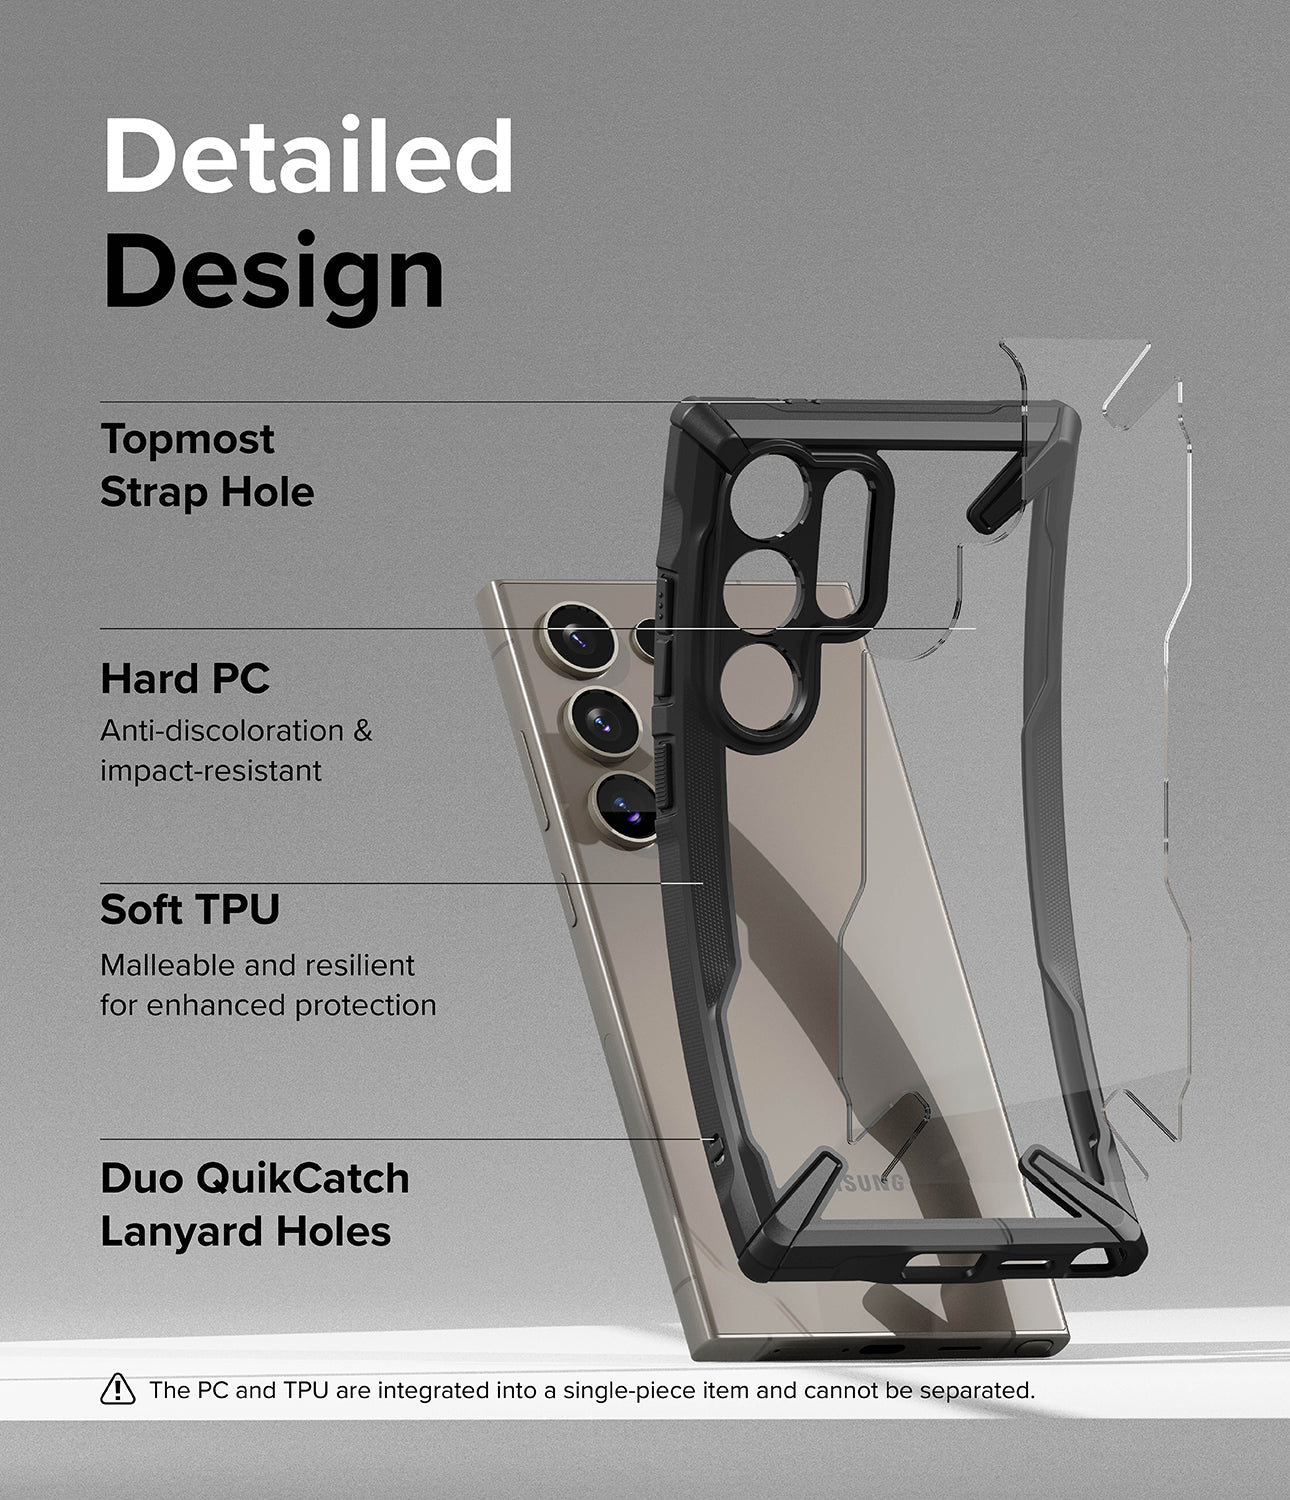 Galaxy S24 Ultra Case | Fusion-X - Black - Detailed Design. Topmost Strap Hole. Anti-discoloration and impact-resistant with Hard PC. Malleable and resilient for enhanced protection with Soft TPU. Duo QuikCatch Lanyard Holes.